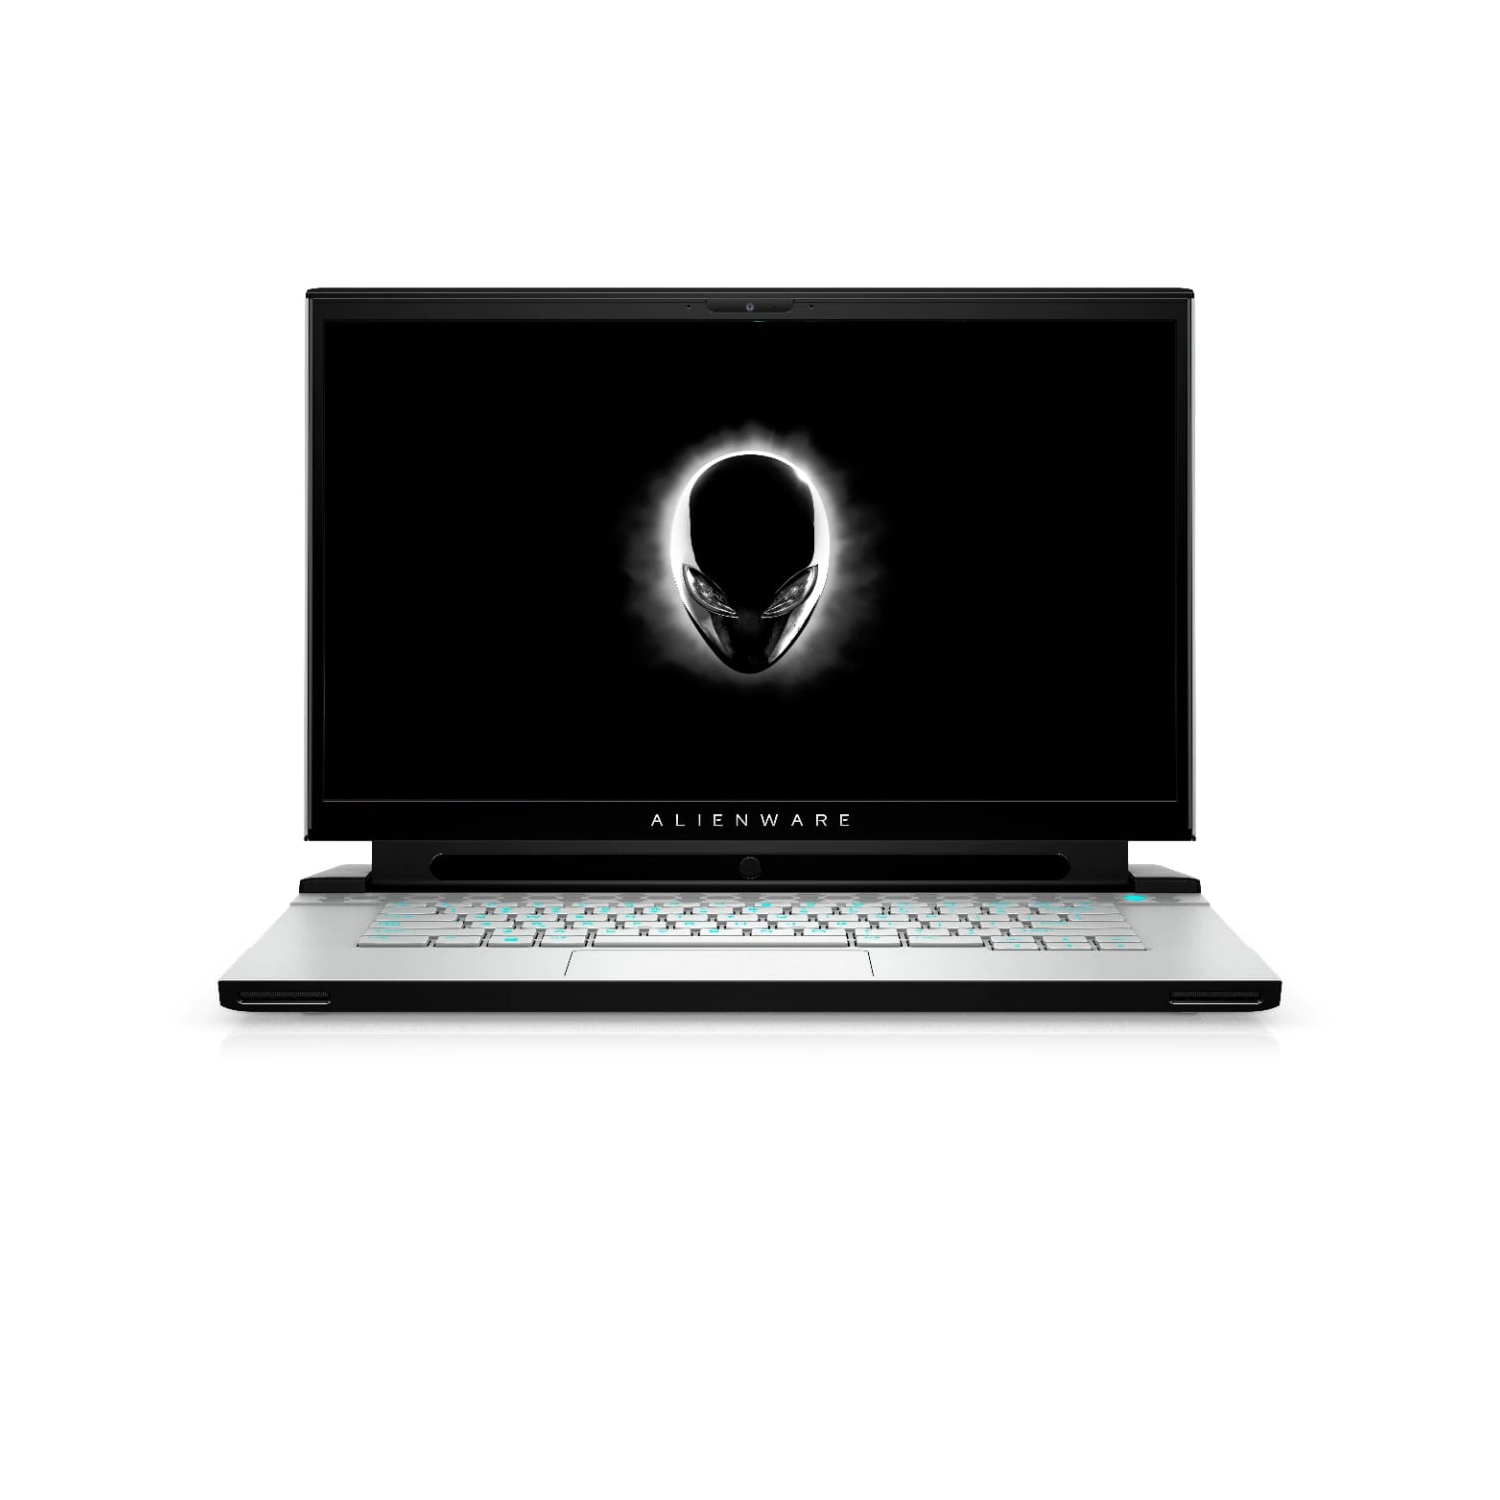 Refurbished (Excellent) - Dell Alienware m15 R3 Gaming Laptop (2020), 15.6" FHD, Core i7 - 512GB SSD + 512GB SSD - 32GB RAM - 2070 Super, 5.1 GHz - 10th Gen CPU Certified